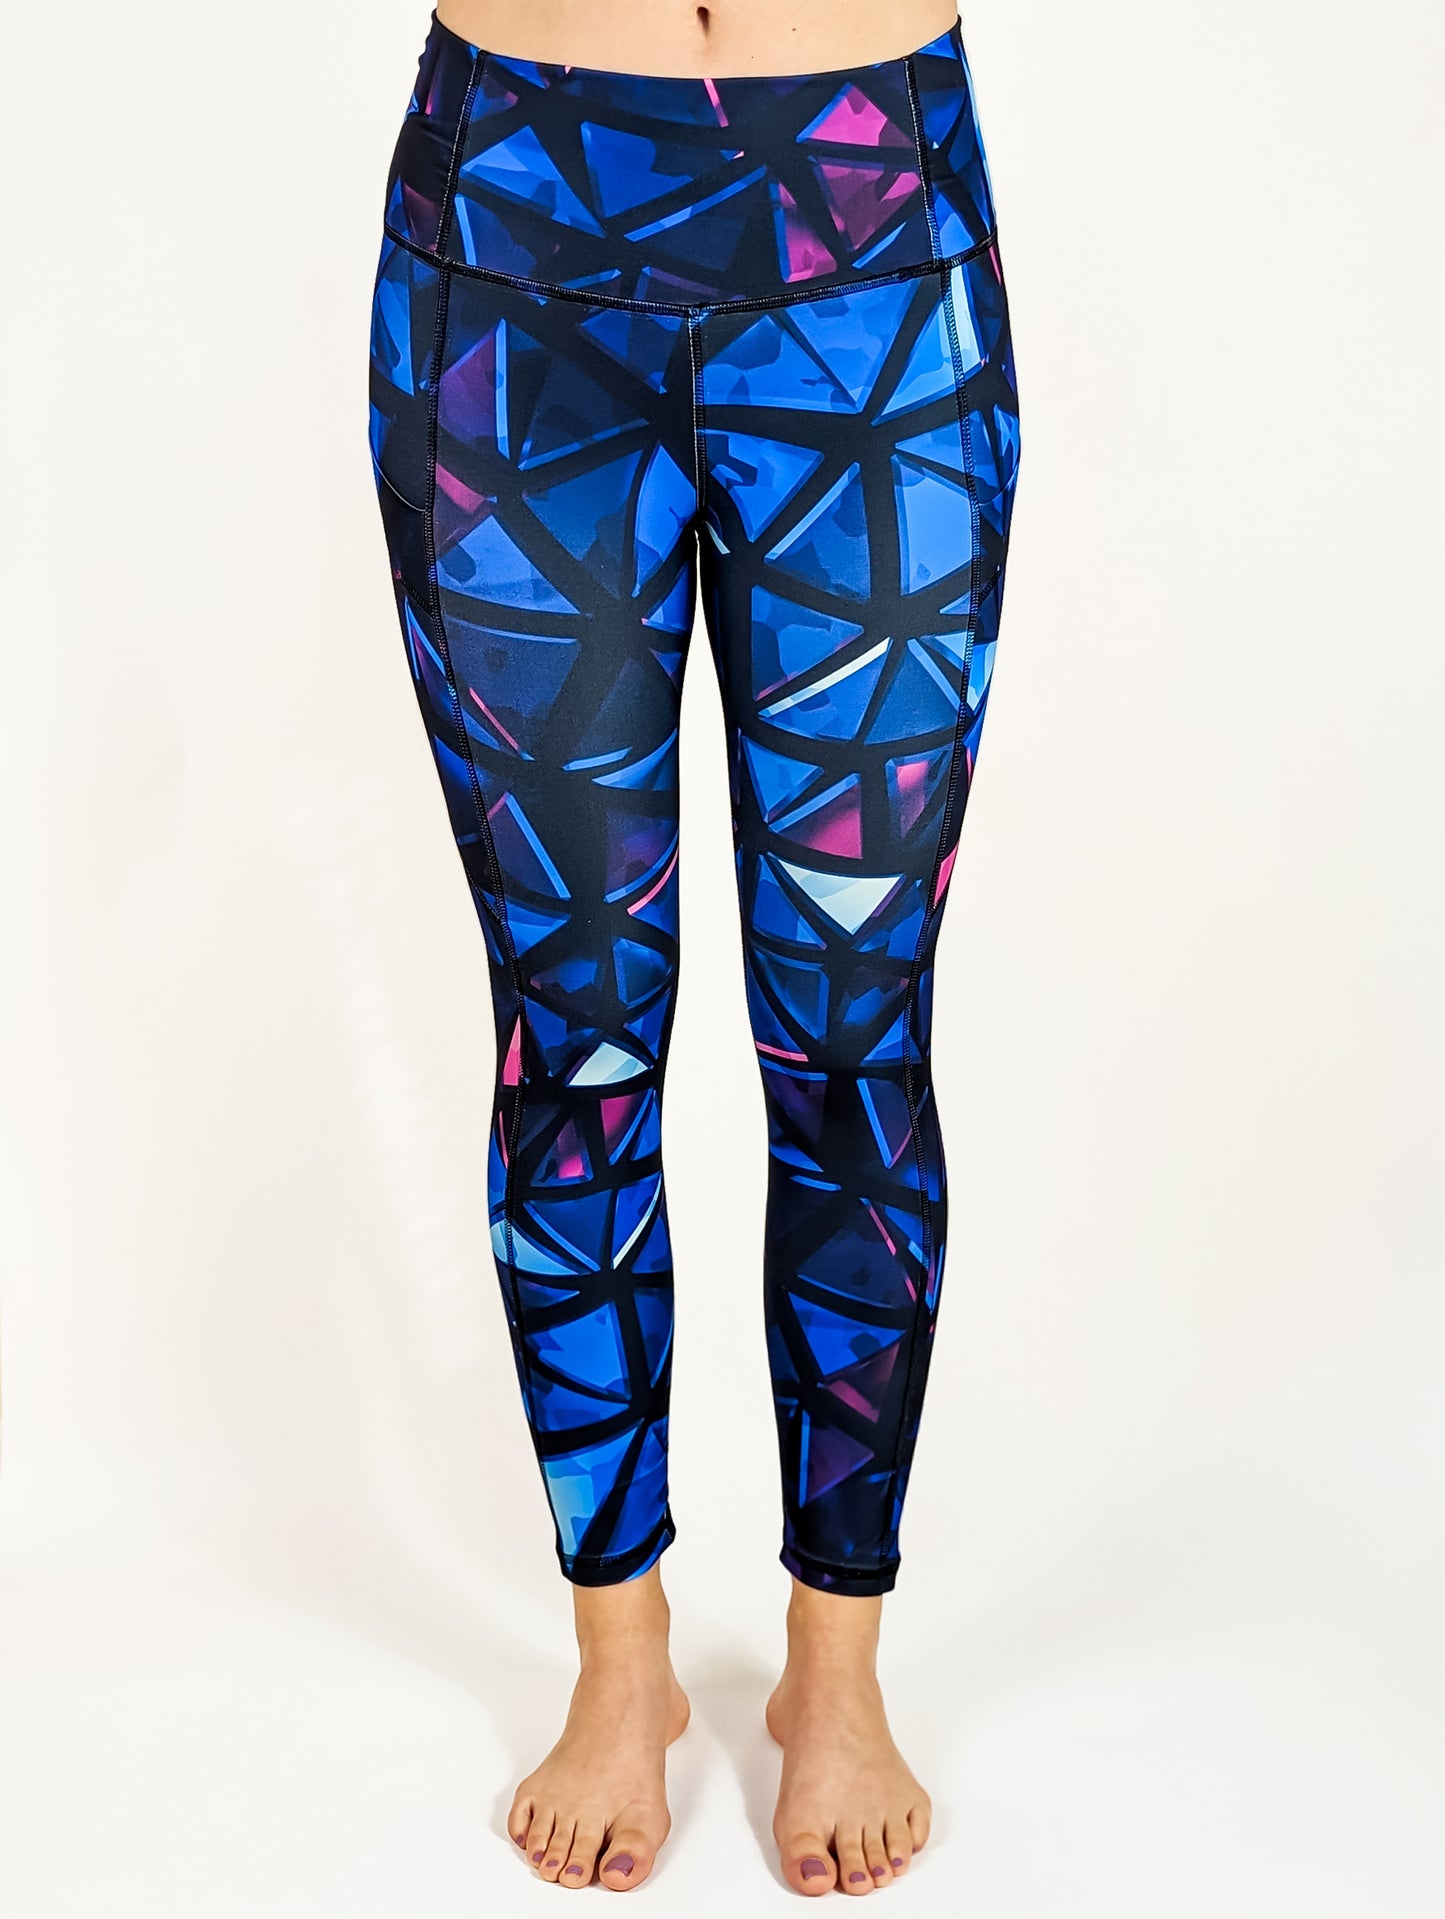 "Stained Glass" Yoga Leggings